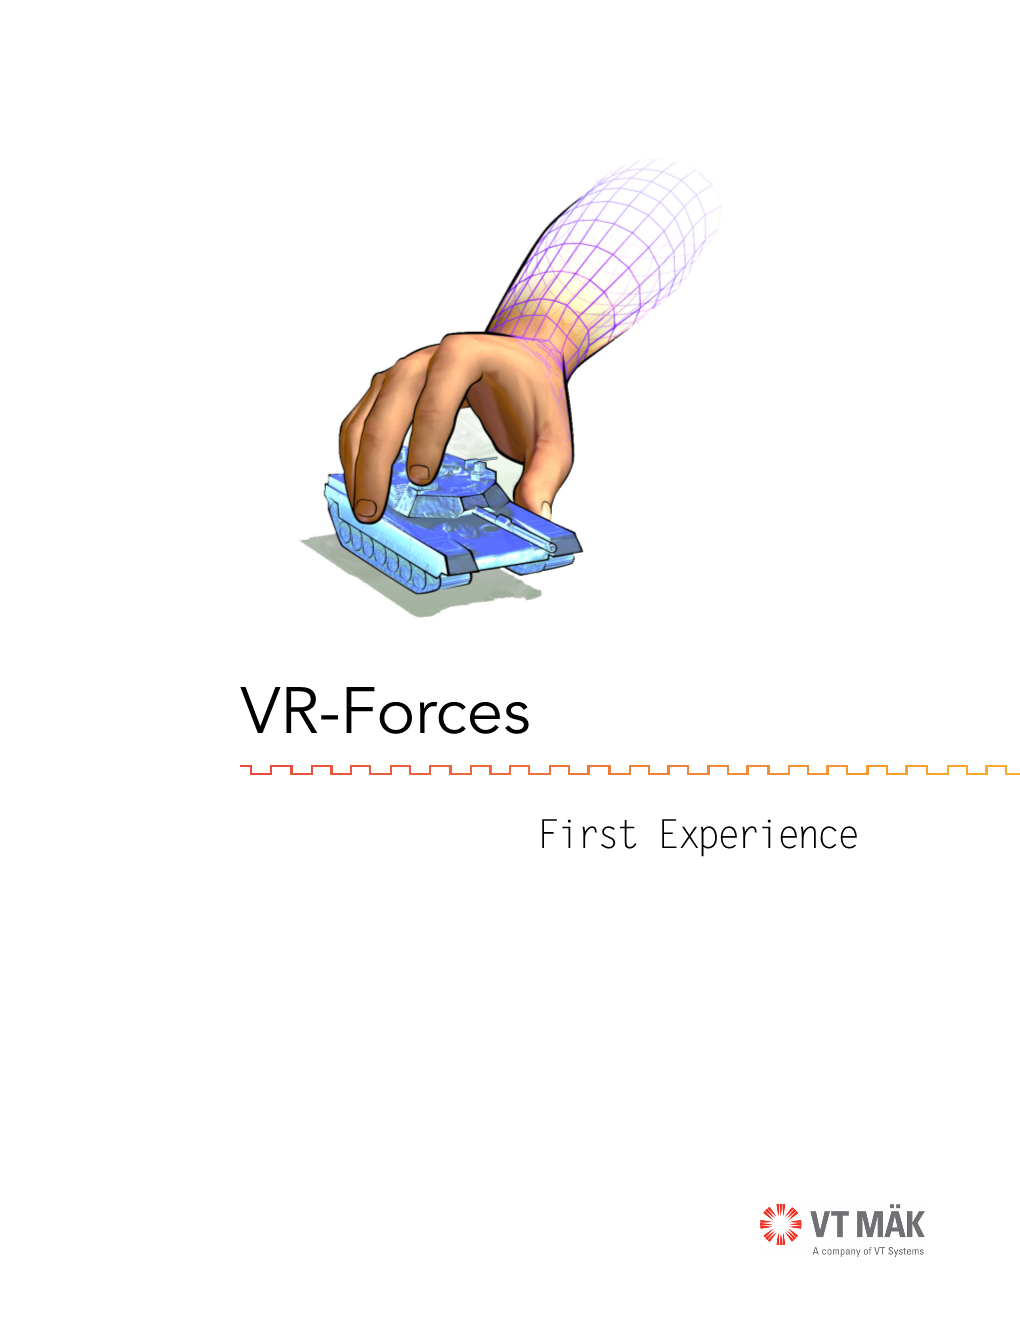 VR-Forces First Experience Guide